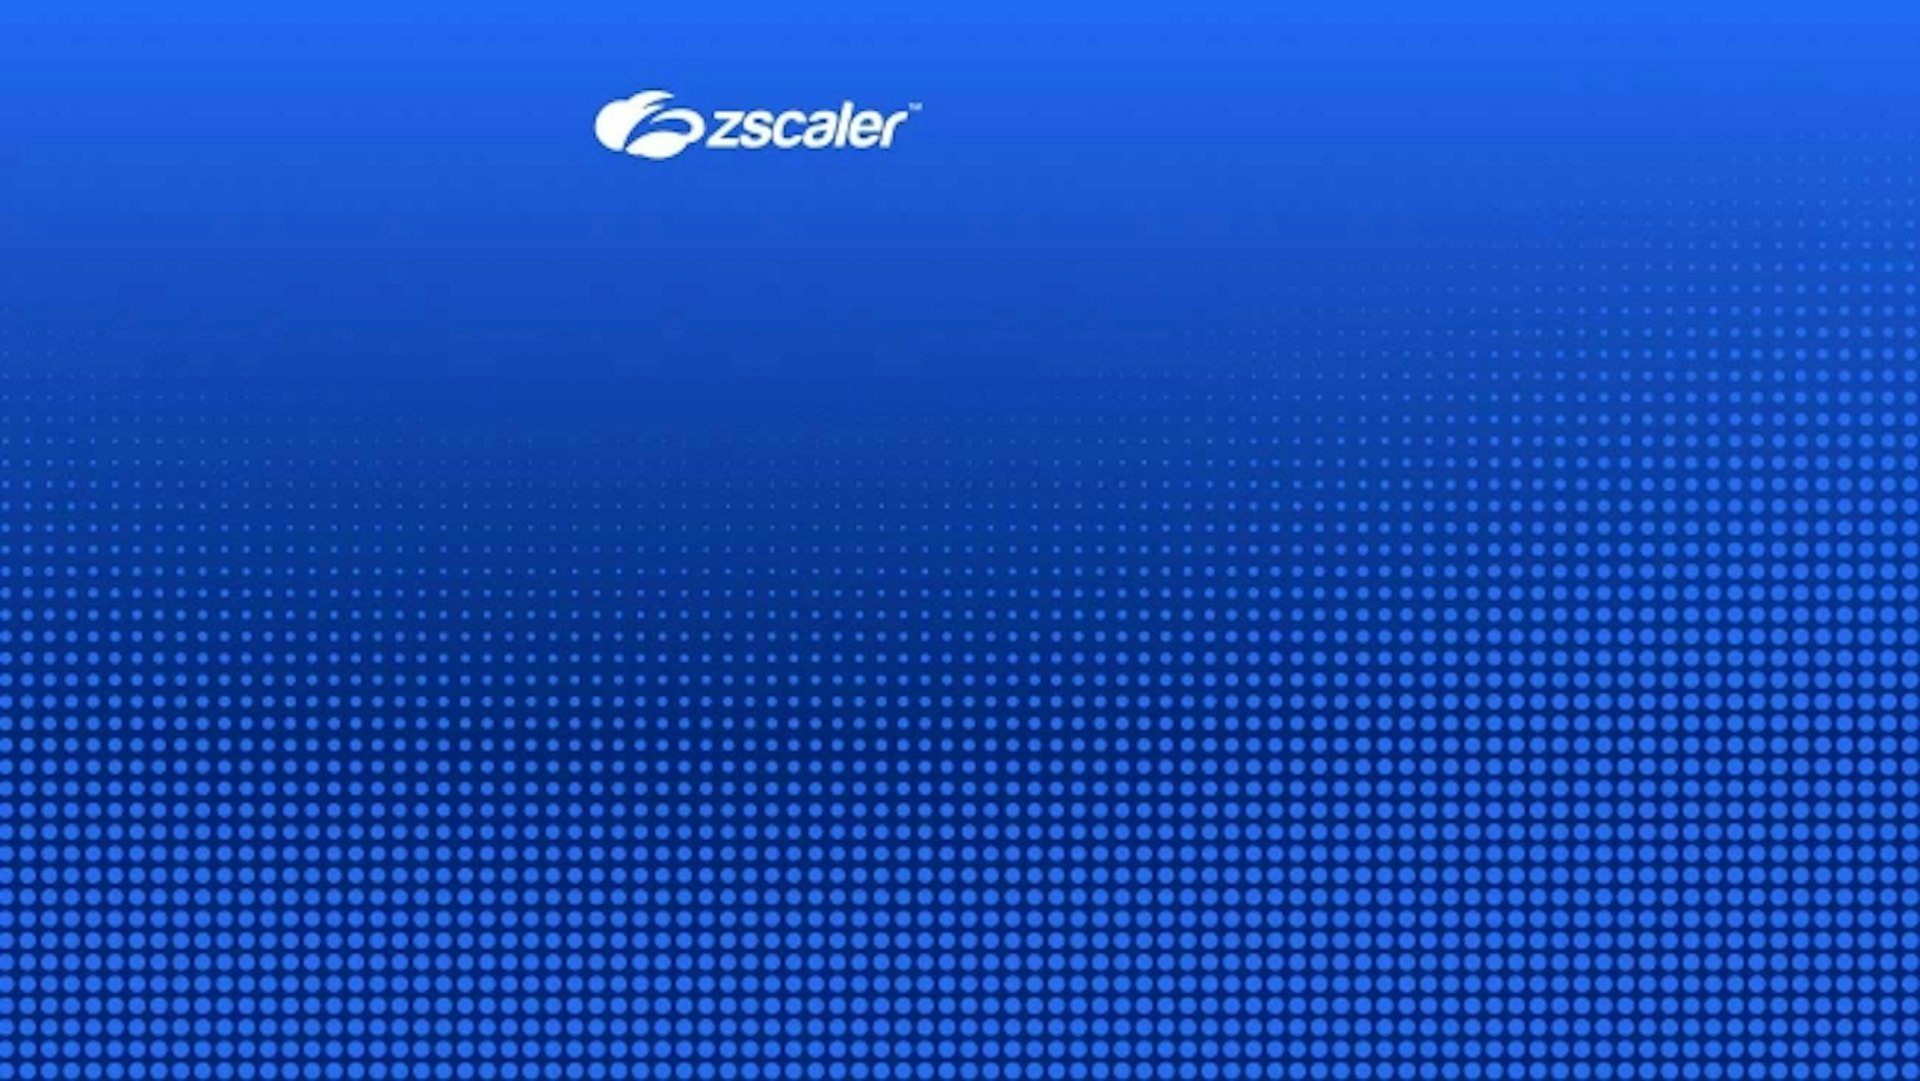 NAB Enables Work-from-Home with Zscaler